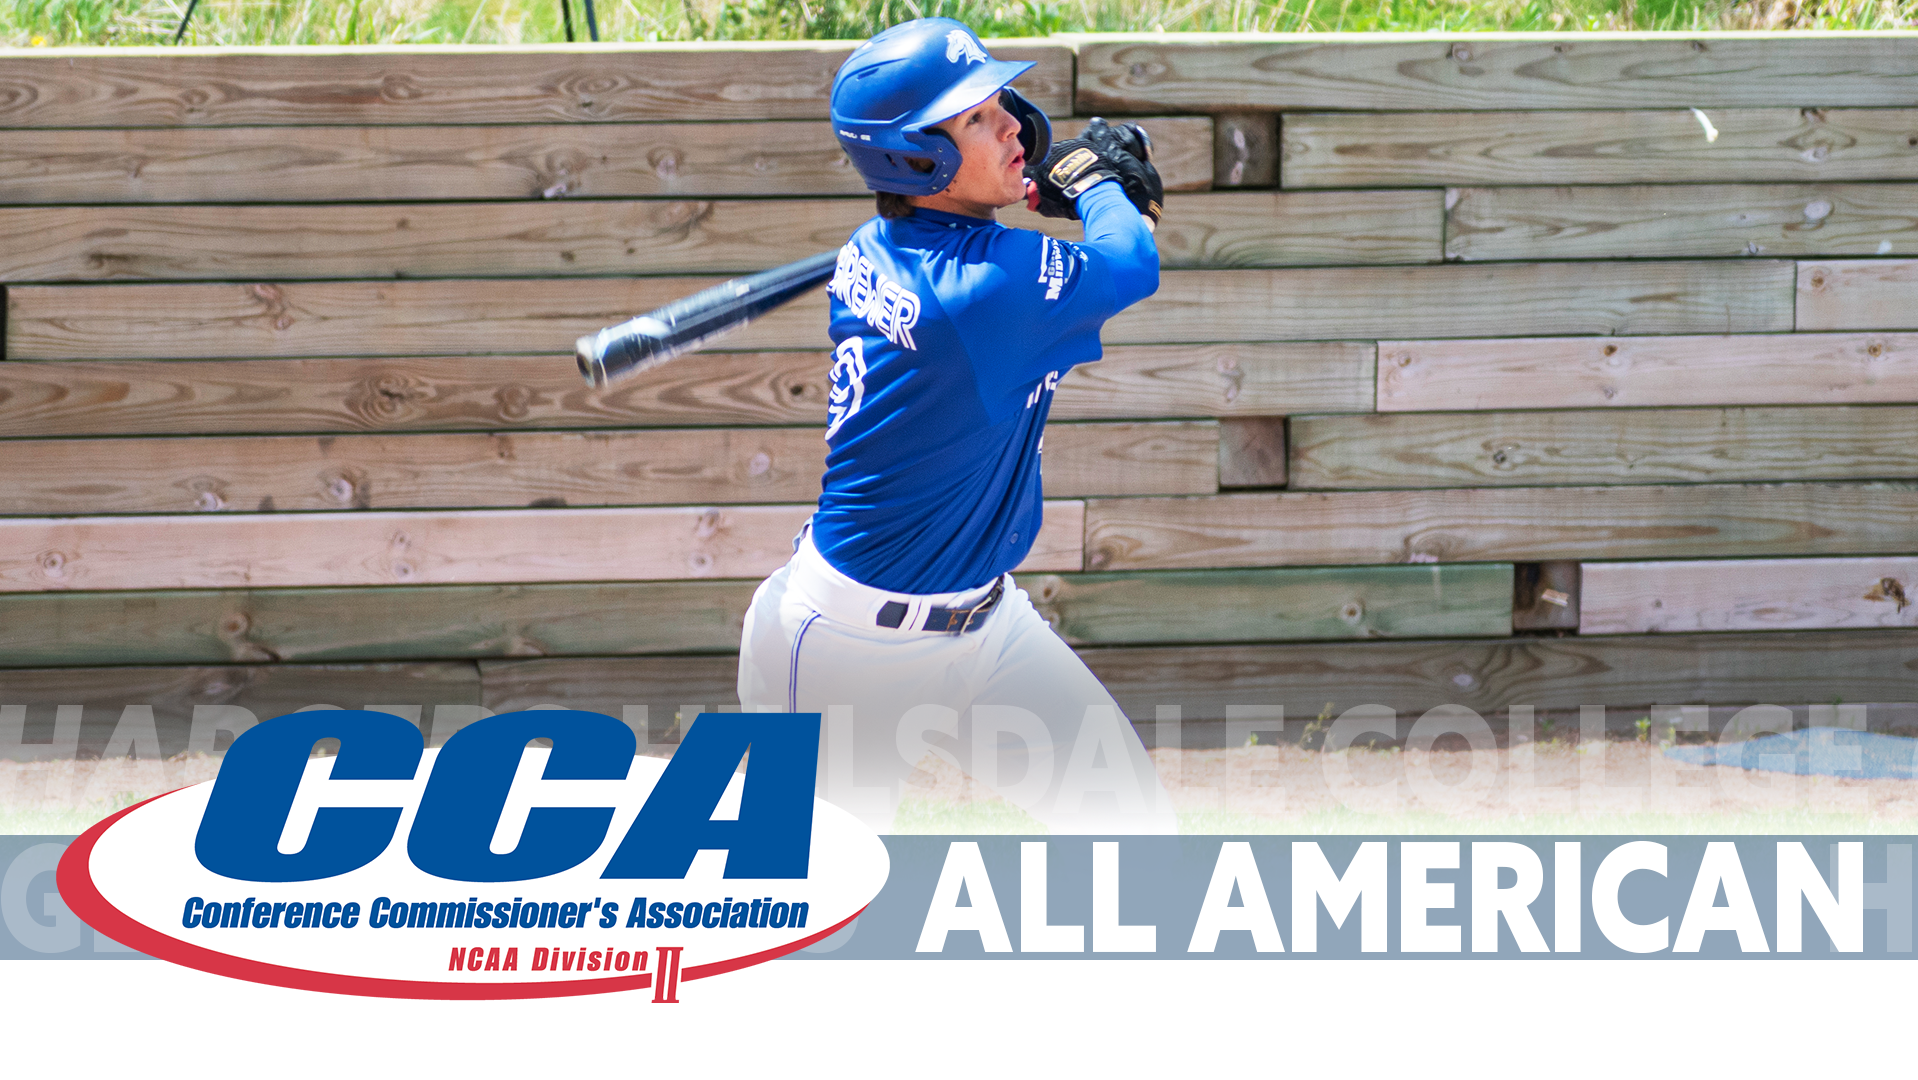 Chargers' Aidan Brewer becomes first Hillsdale baseball player since 2019 to earn D2CCA All-American honors